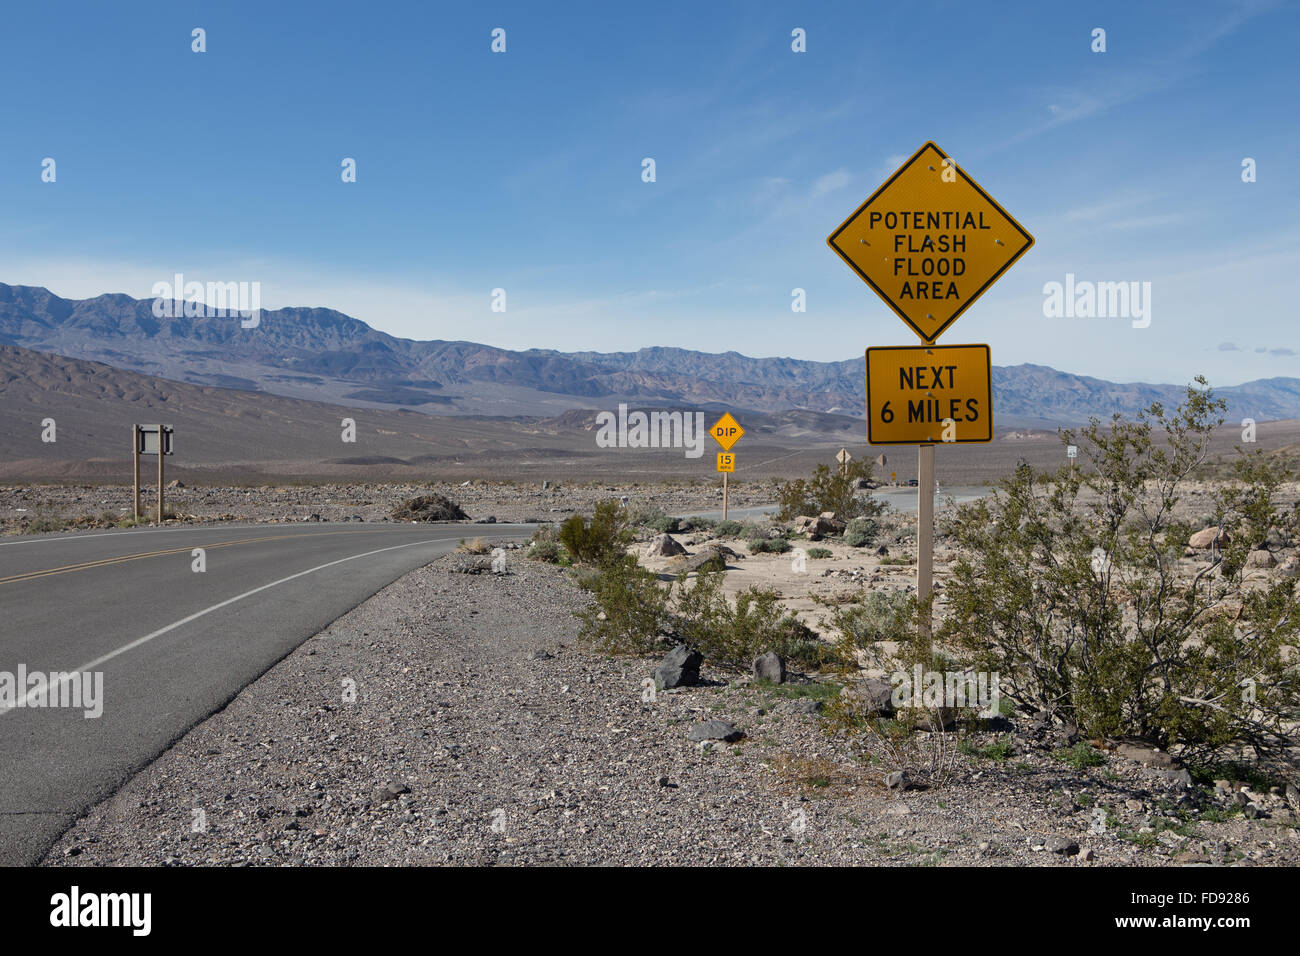 Flash flood warning signs aon the roadside in Death Valley California warning visitors of potential flooding danger Stock Photo